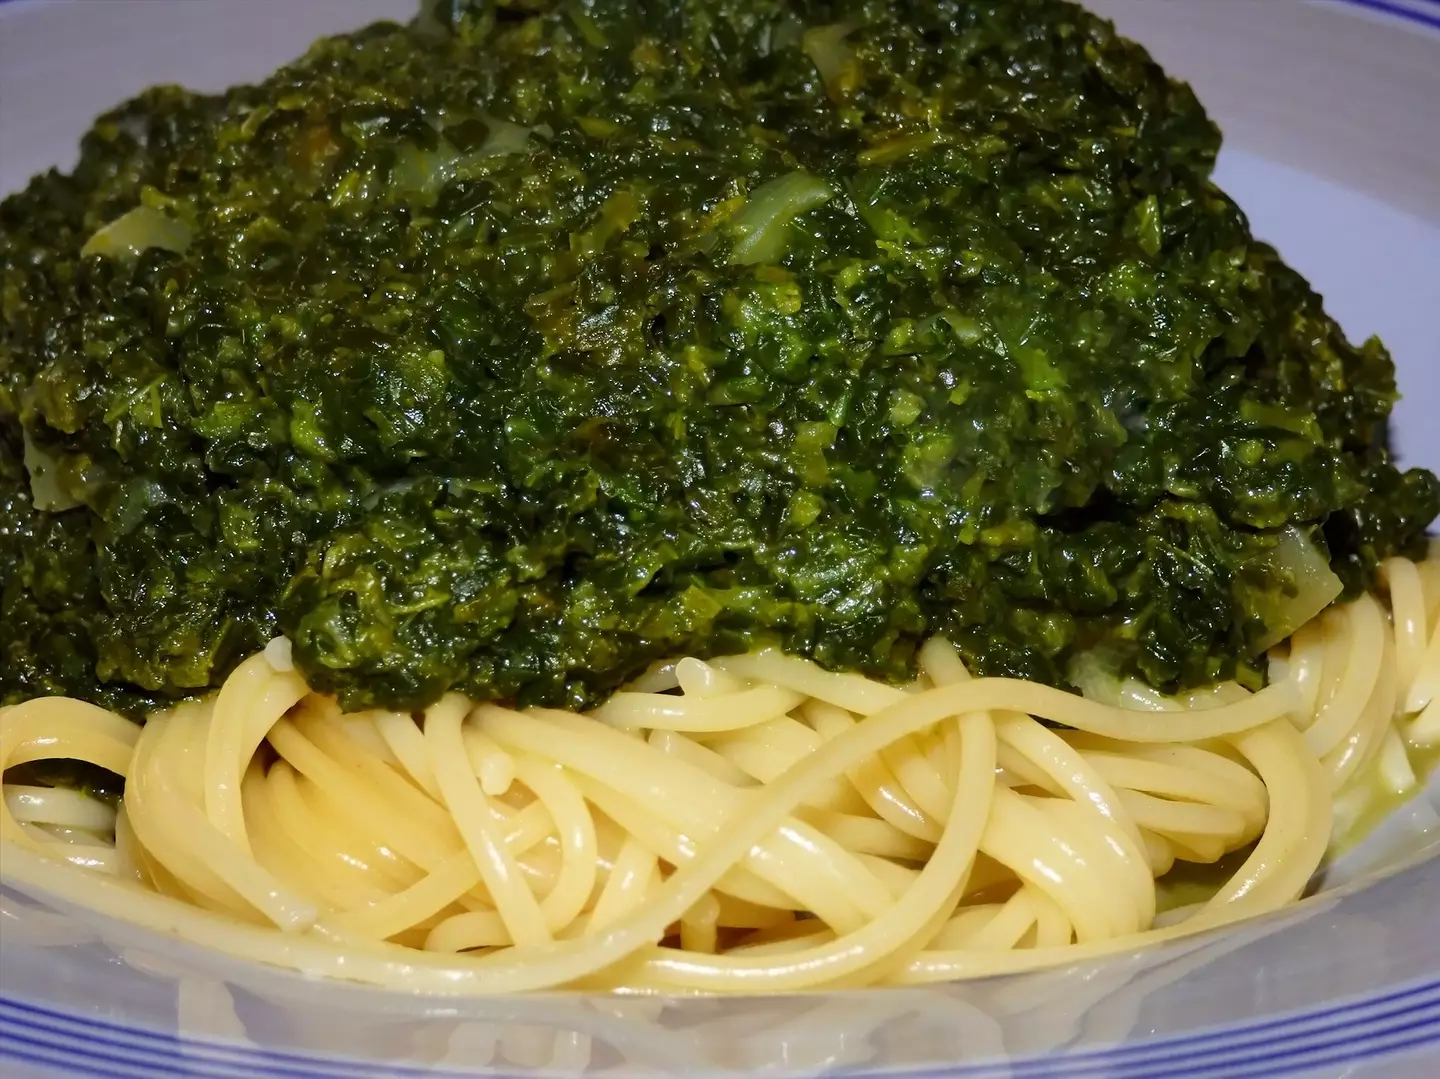 Think of all the... spinach and spaghetti you could eat.